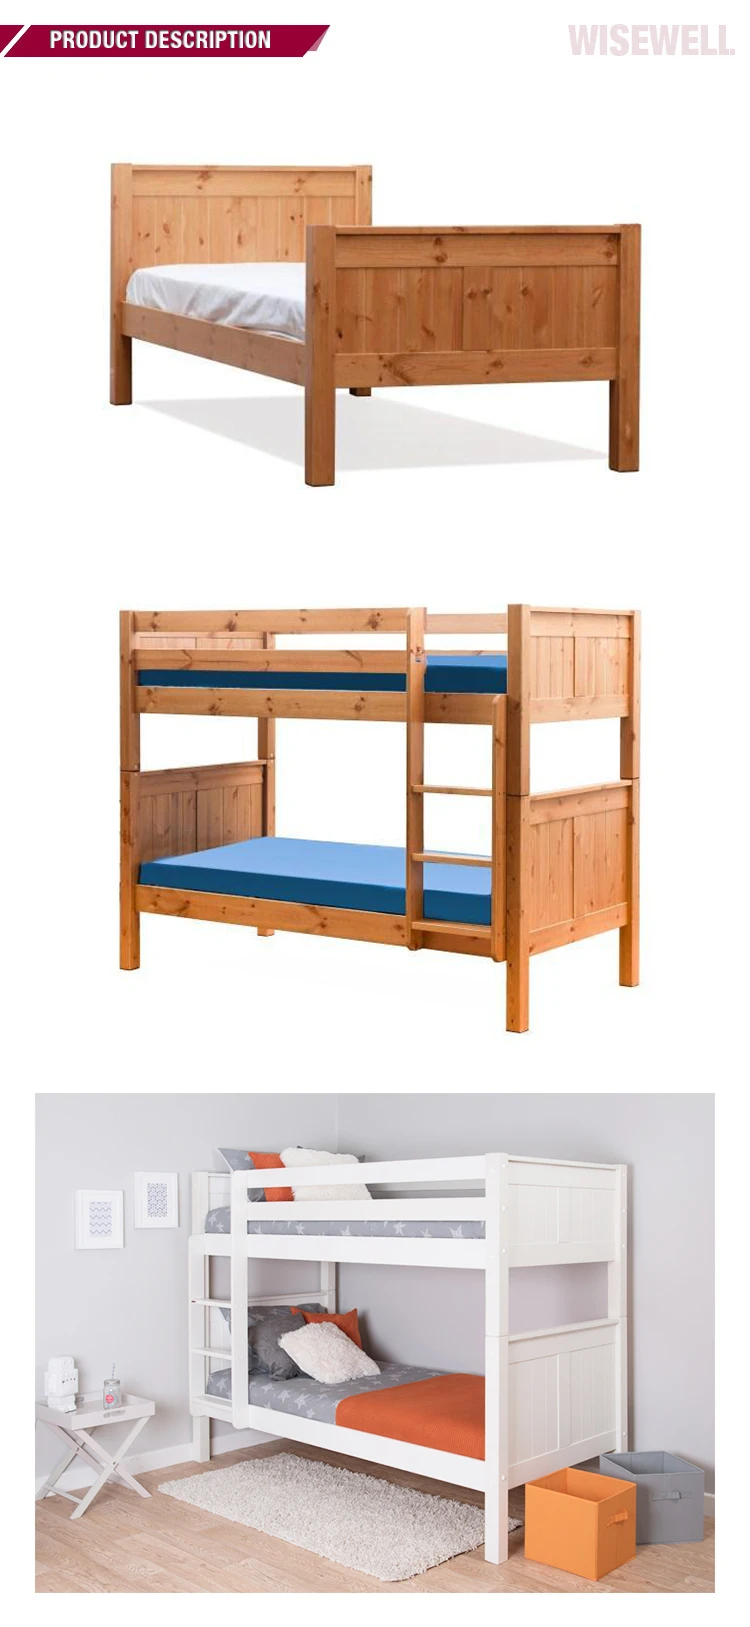 W-B-0083 solid wood adult double bunk bed